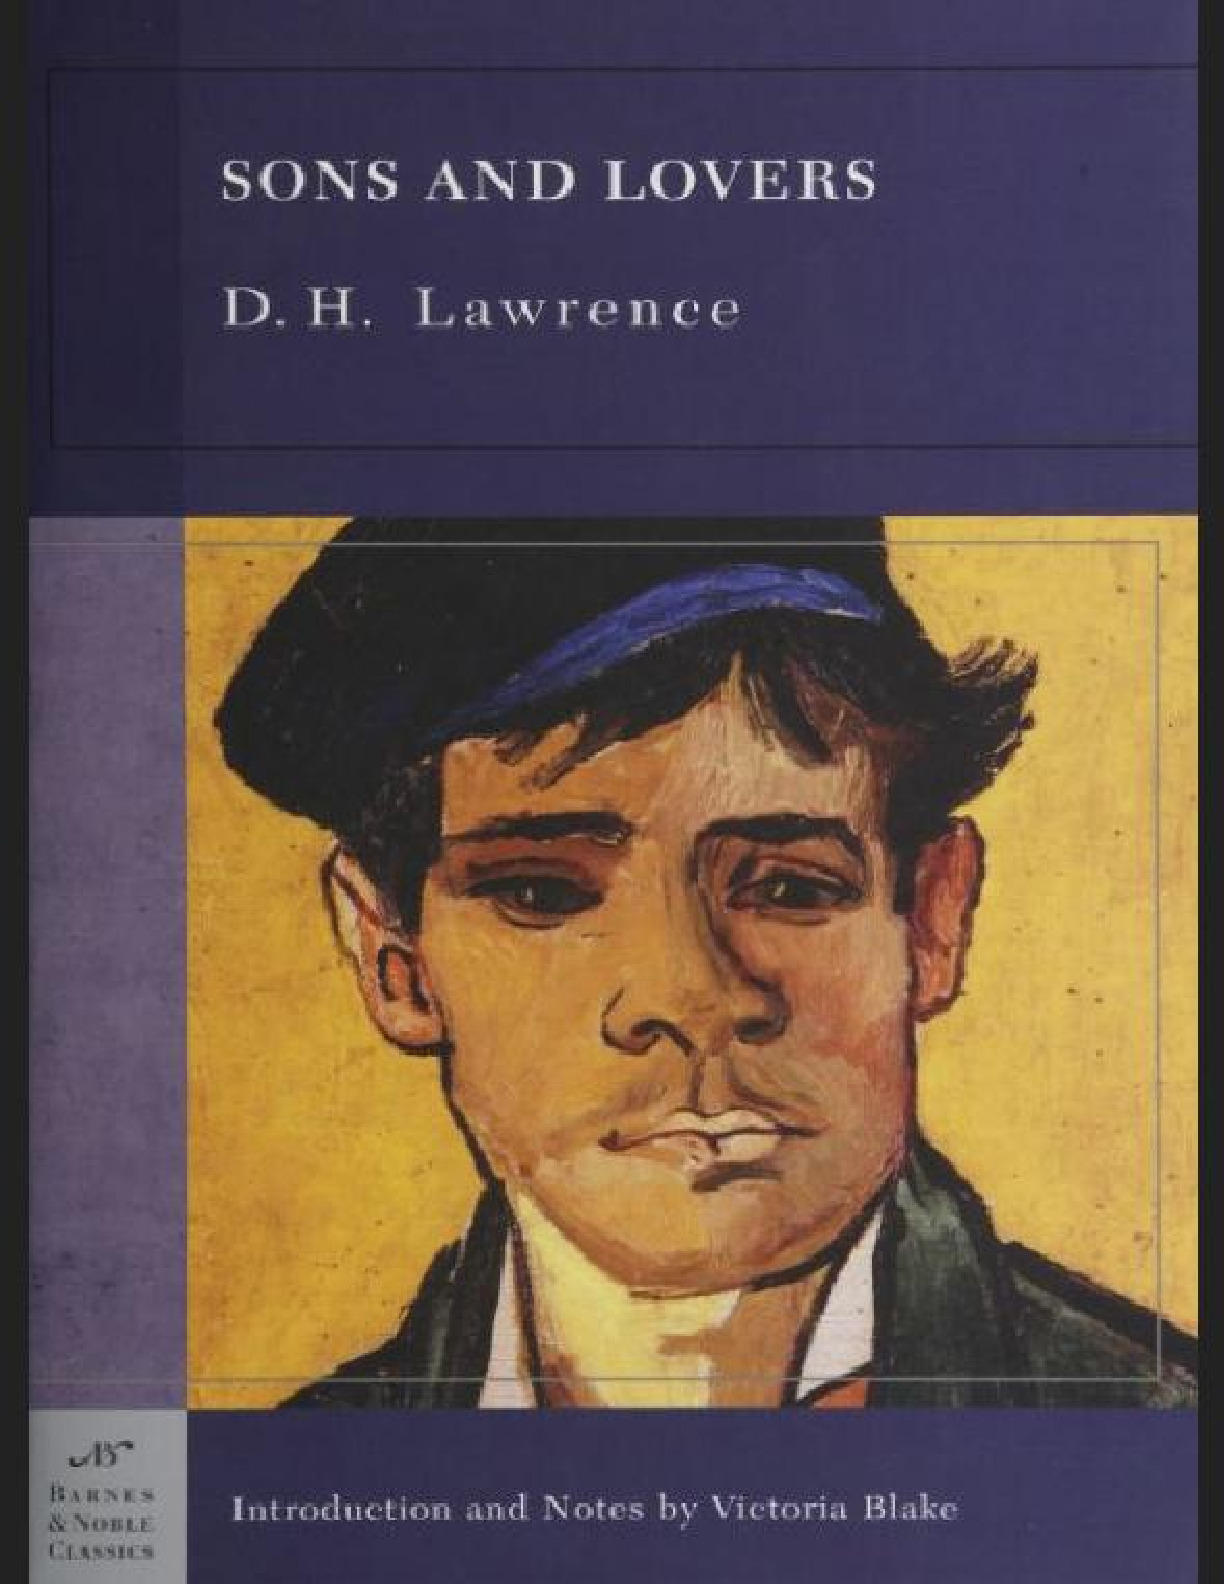 Sons and Lovers (Barnes & Noble Classics Series) – D. H. Lawrence